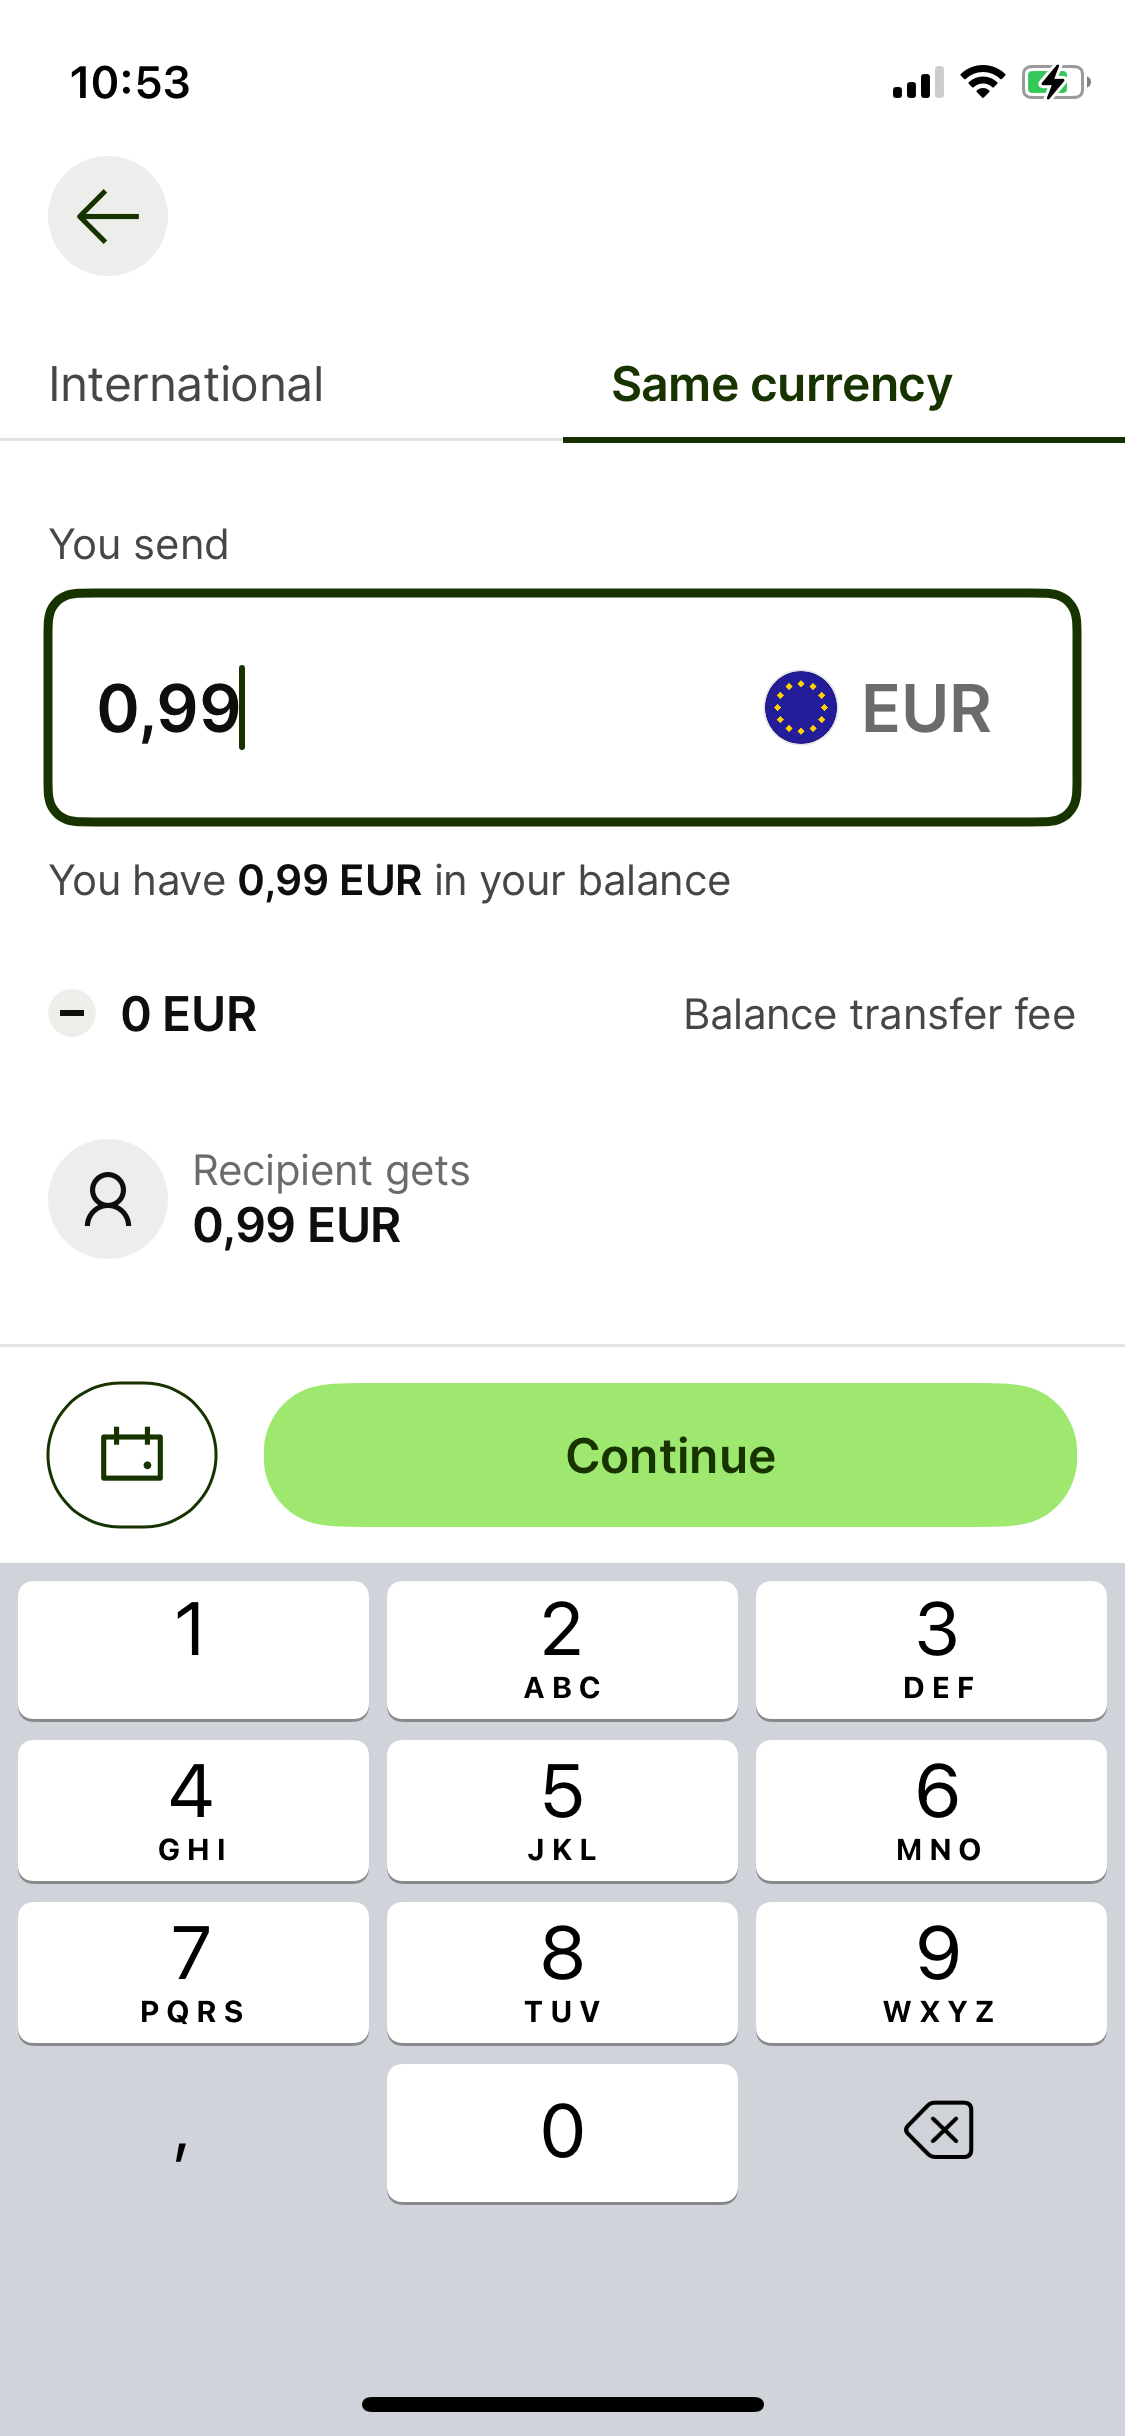 Same currency transfer in Wise app